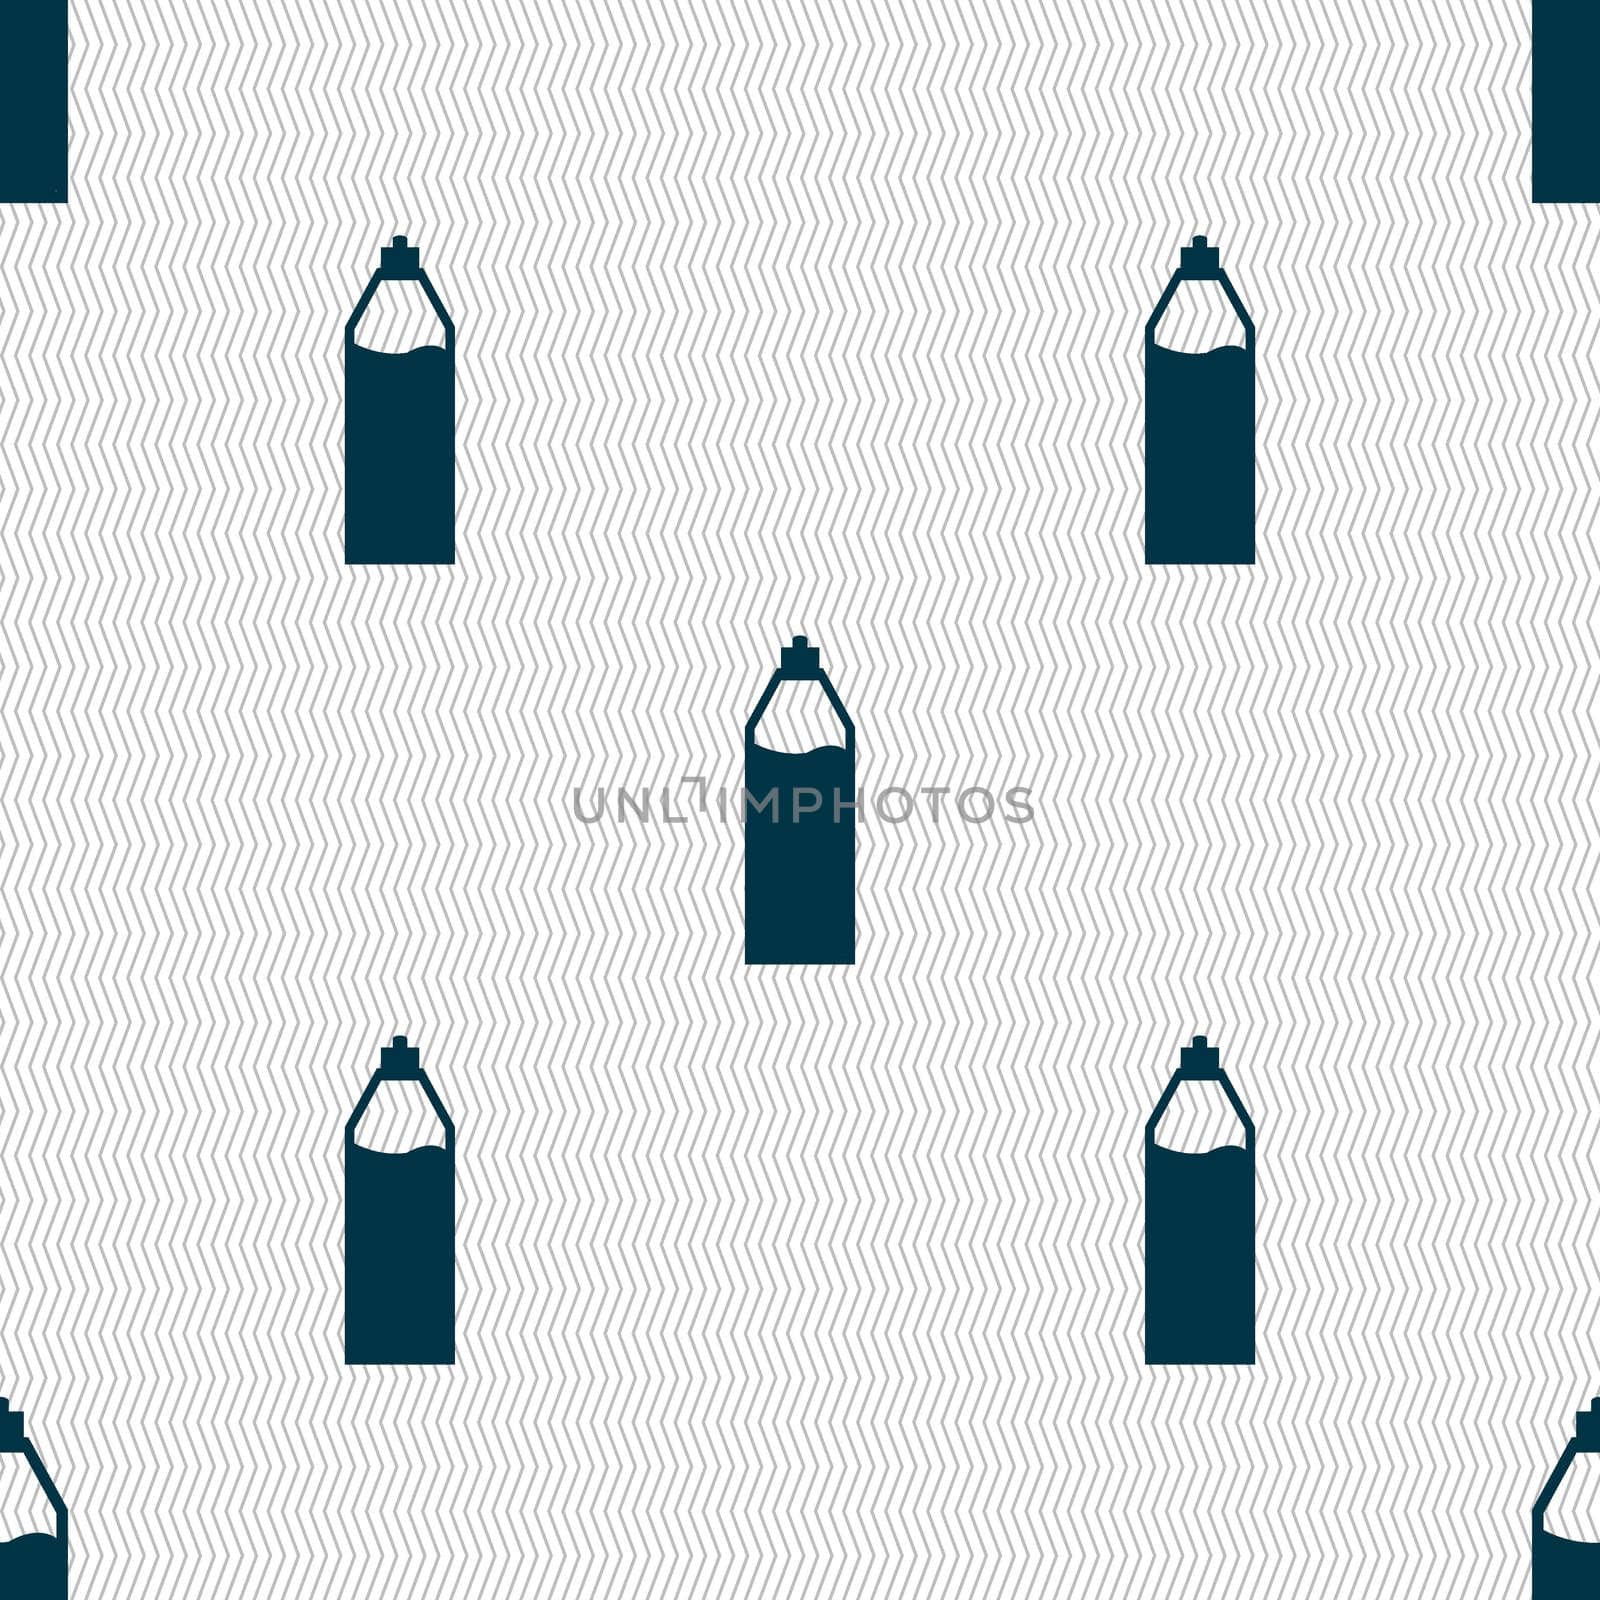 Plastic bottle with drink icon sign. Seamless abstract background with geometric shapes.  by serhii_lohvyniuk